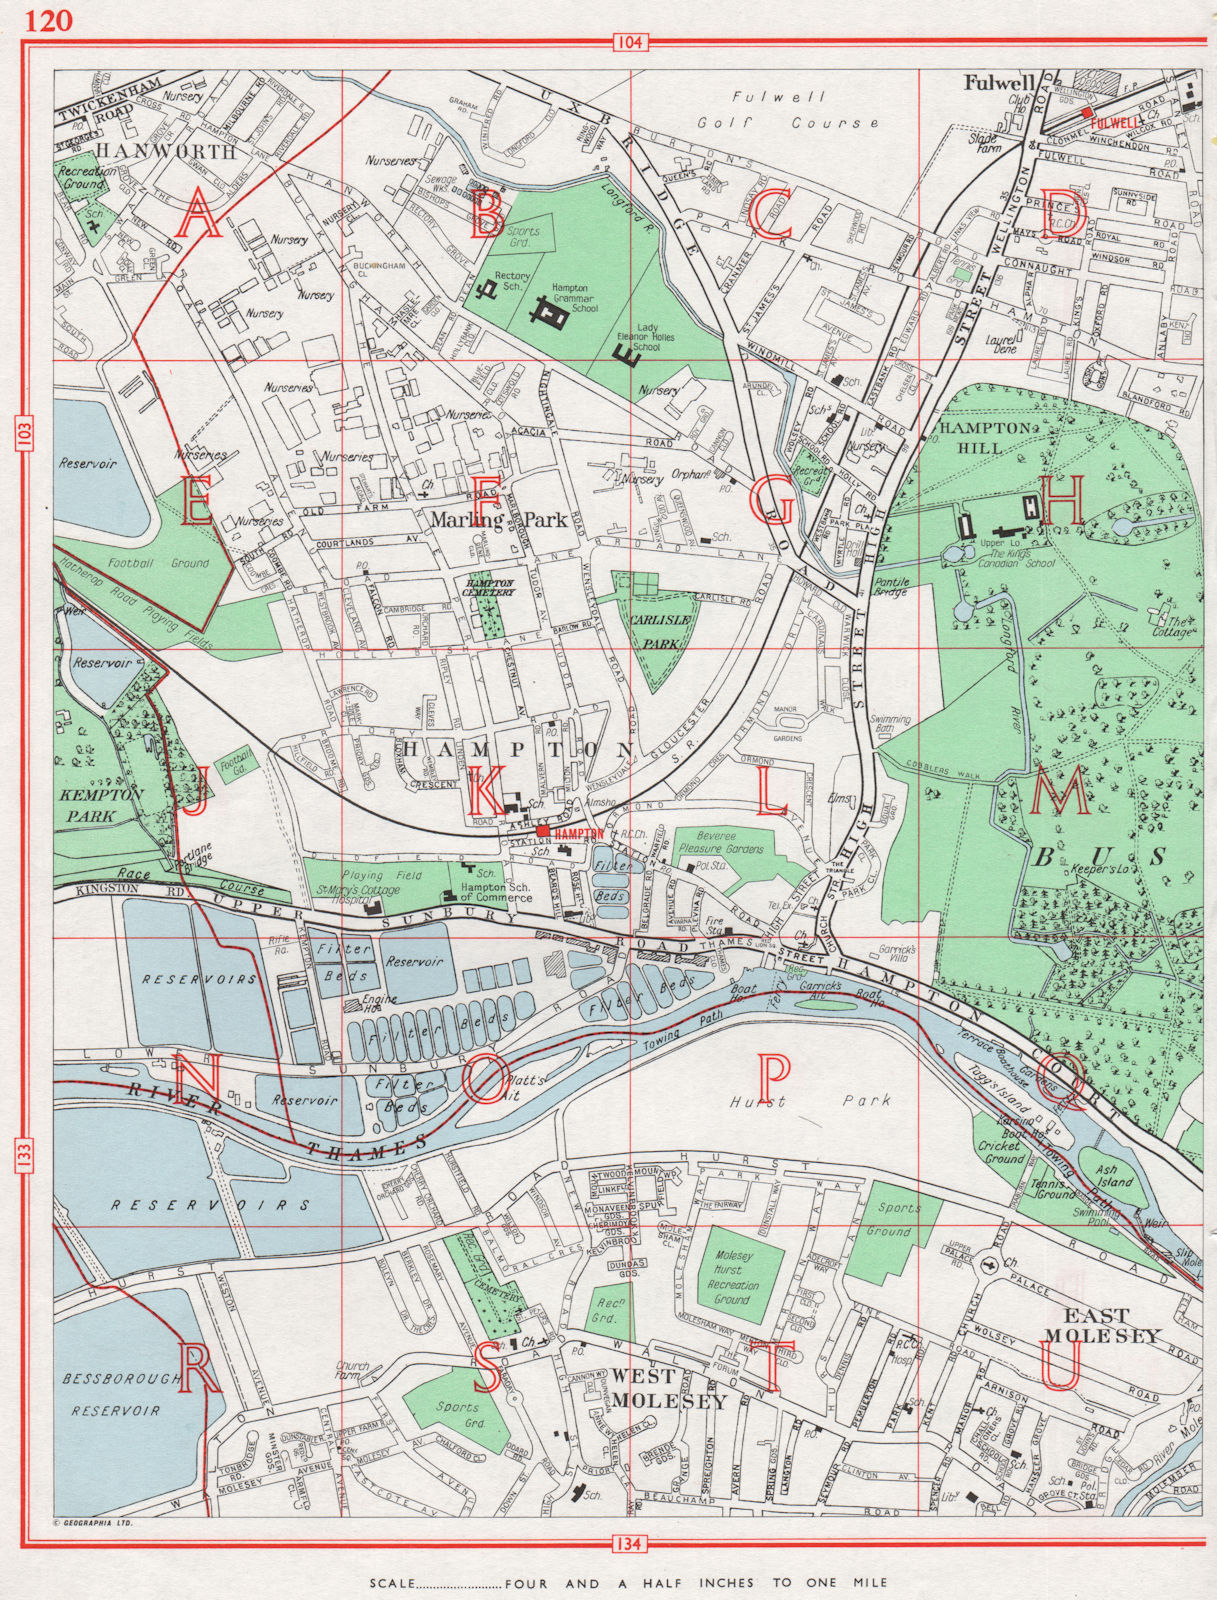 Associate Product HAMPTON. Fulwell Hanworth West Molesey East Molesey Bushy Park 1964 old map